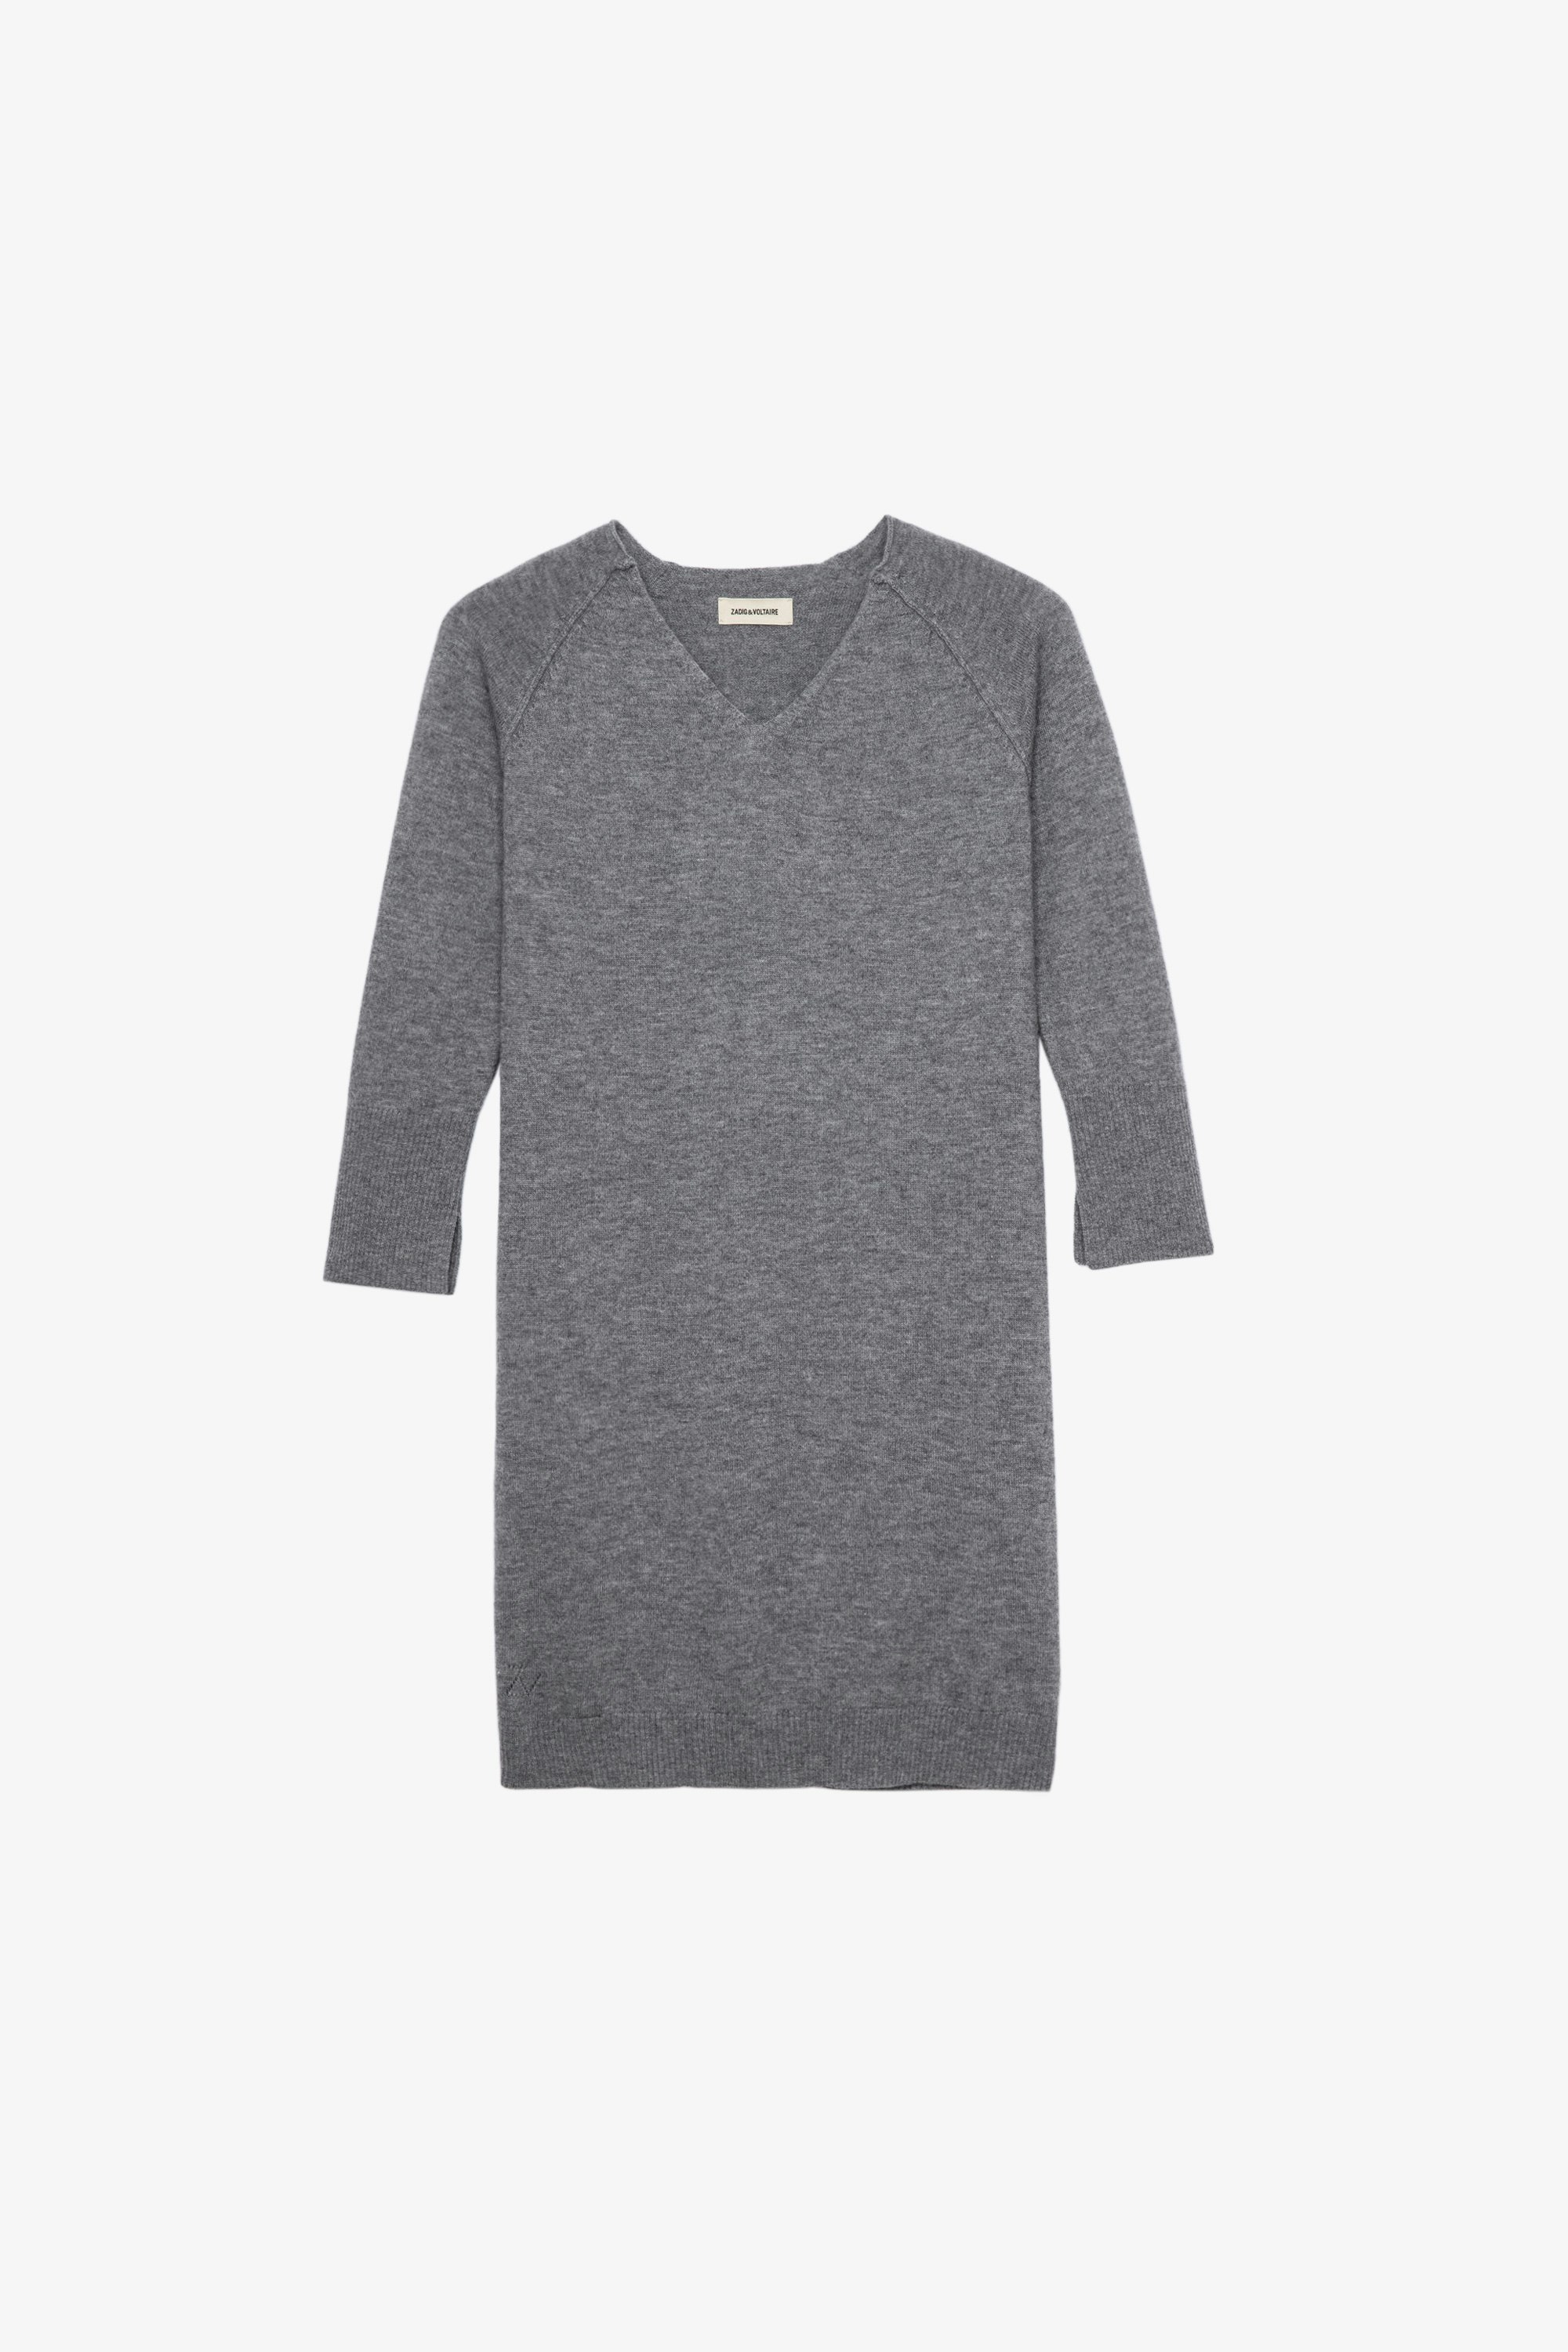 Carrie Children’s Dress Children’s grey long-sleeve knit dress with print on back 